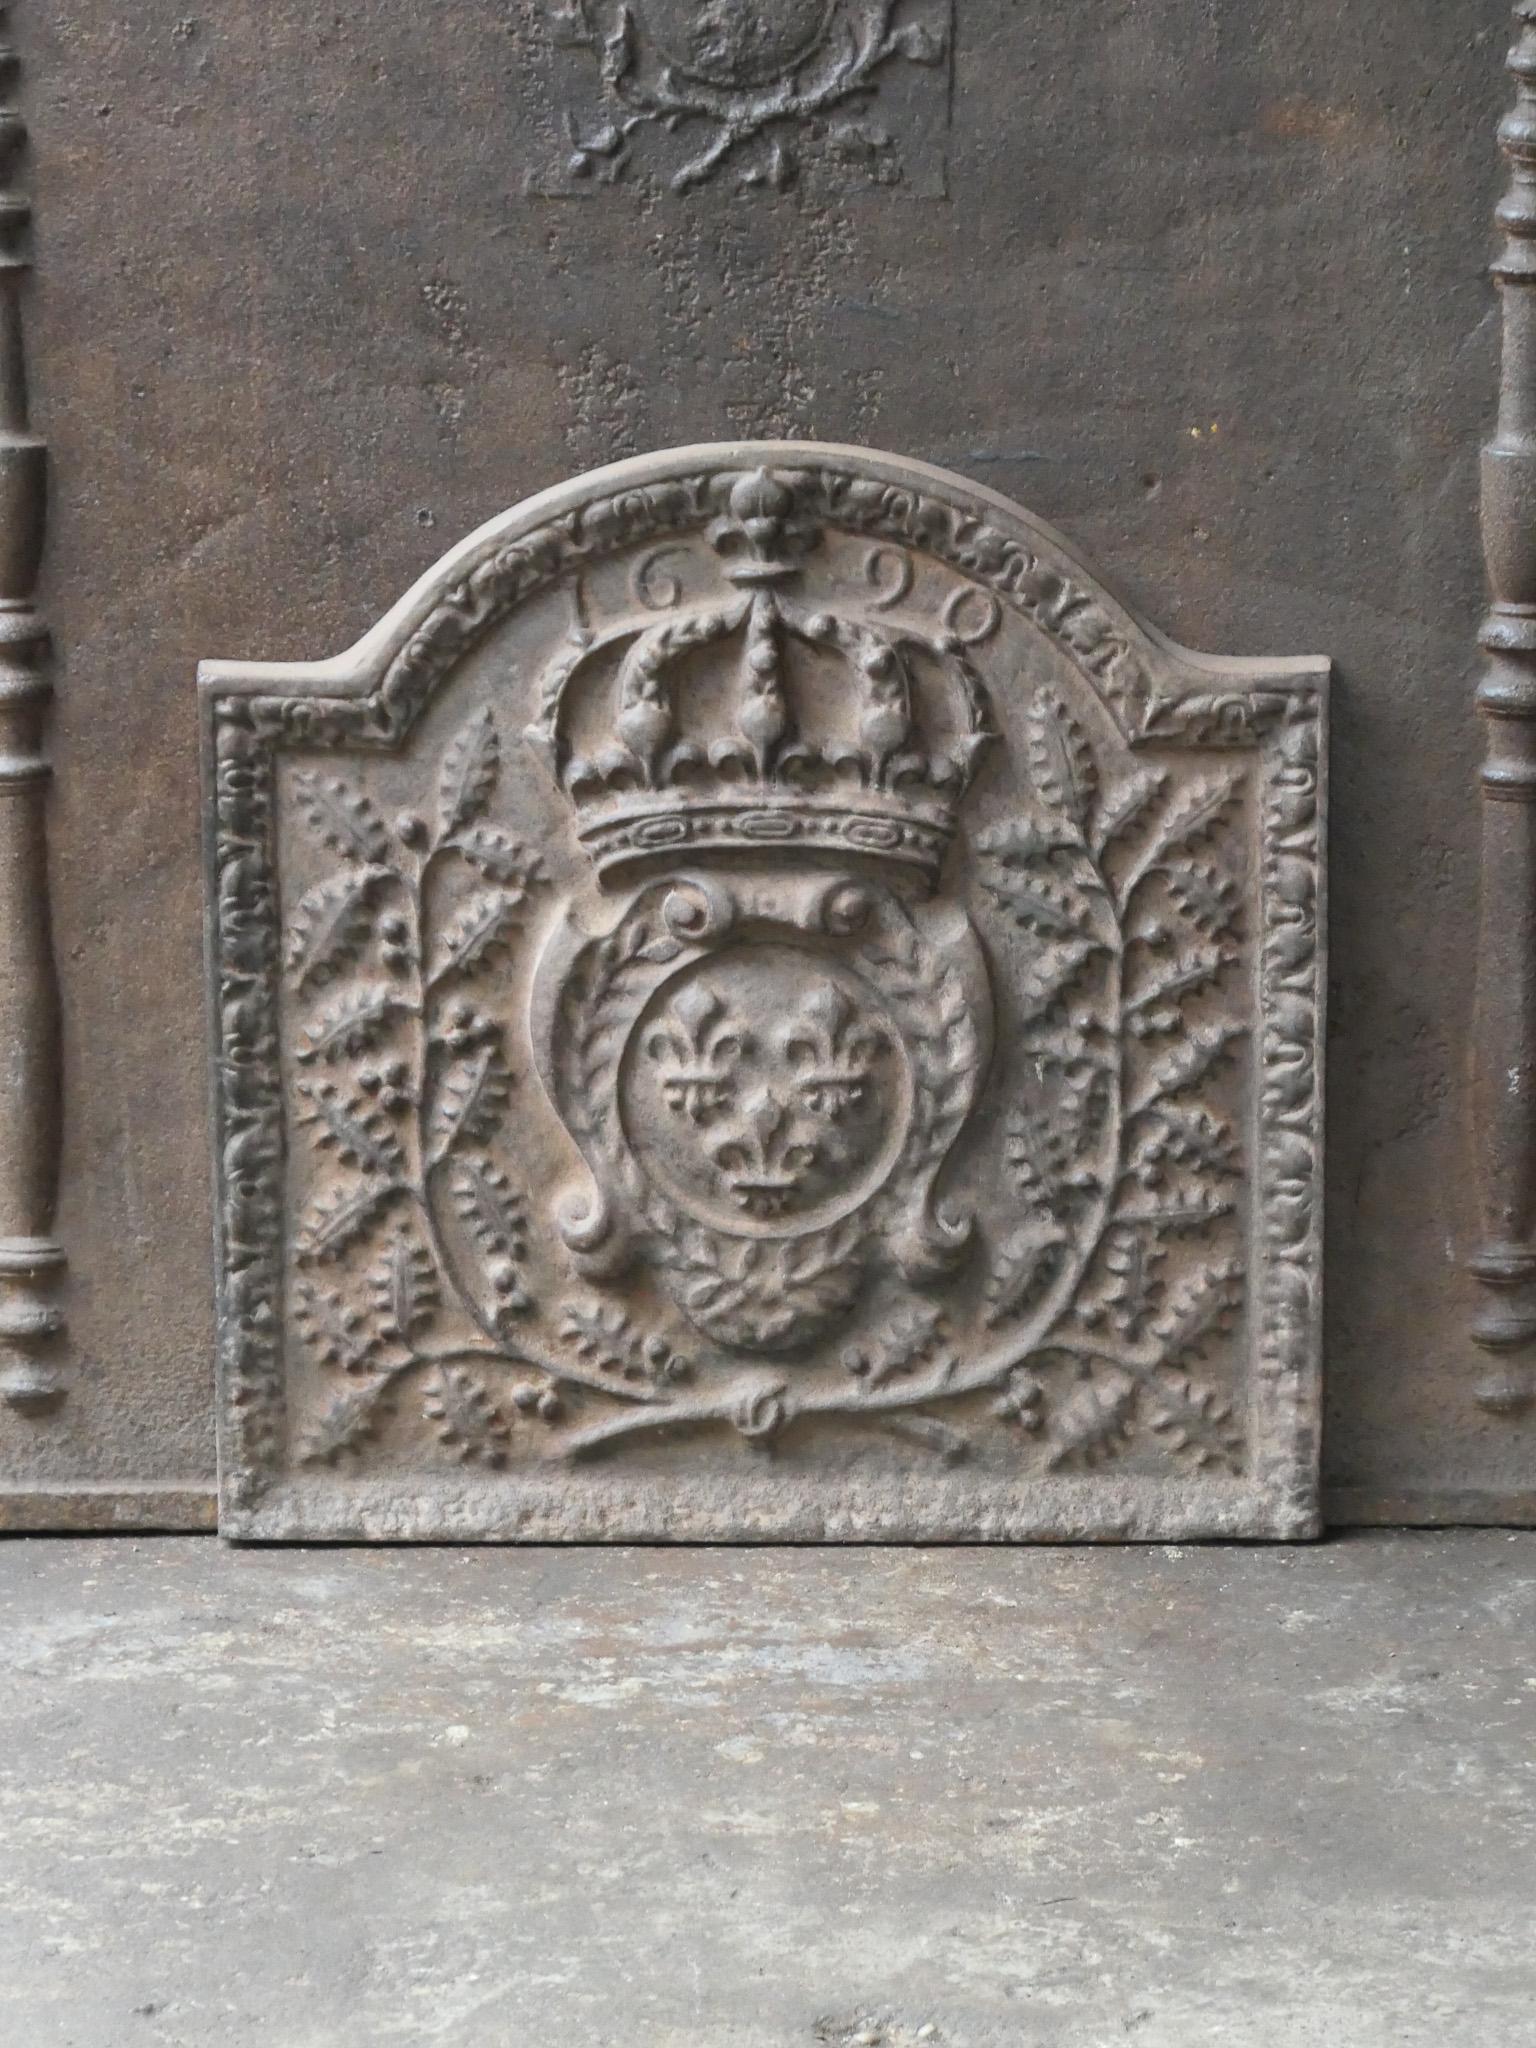 20th century French Louis XIV period fireback with the Arms of France. A coat of arms of the House of Bourbon, an originally French royal house that became a major dynasty in Europe. The house delivered kings for Spain (Navarra), France, both